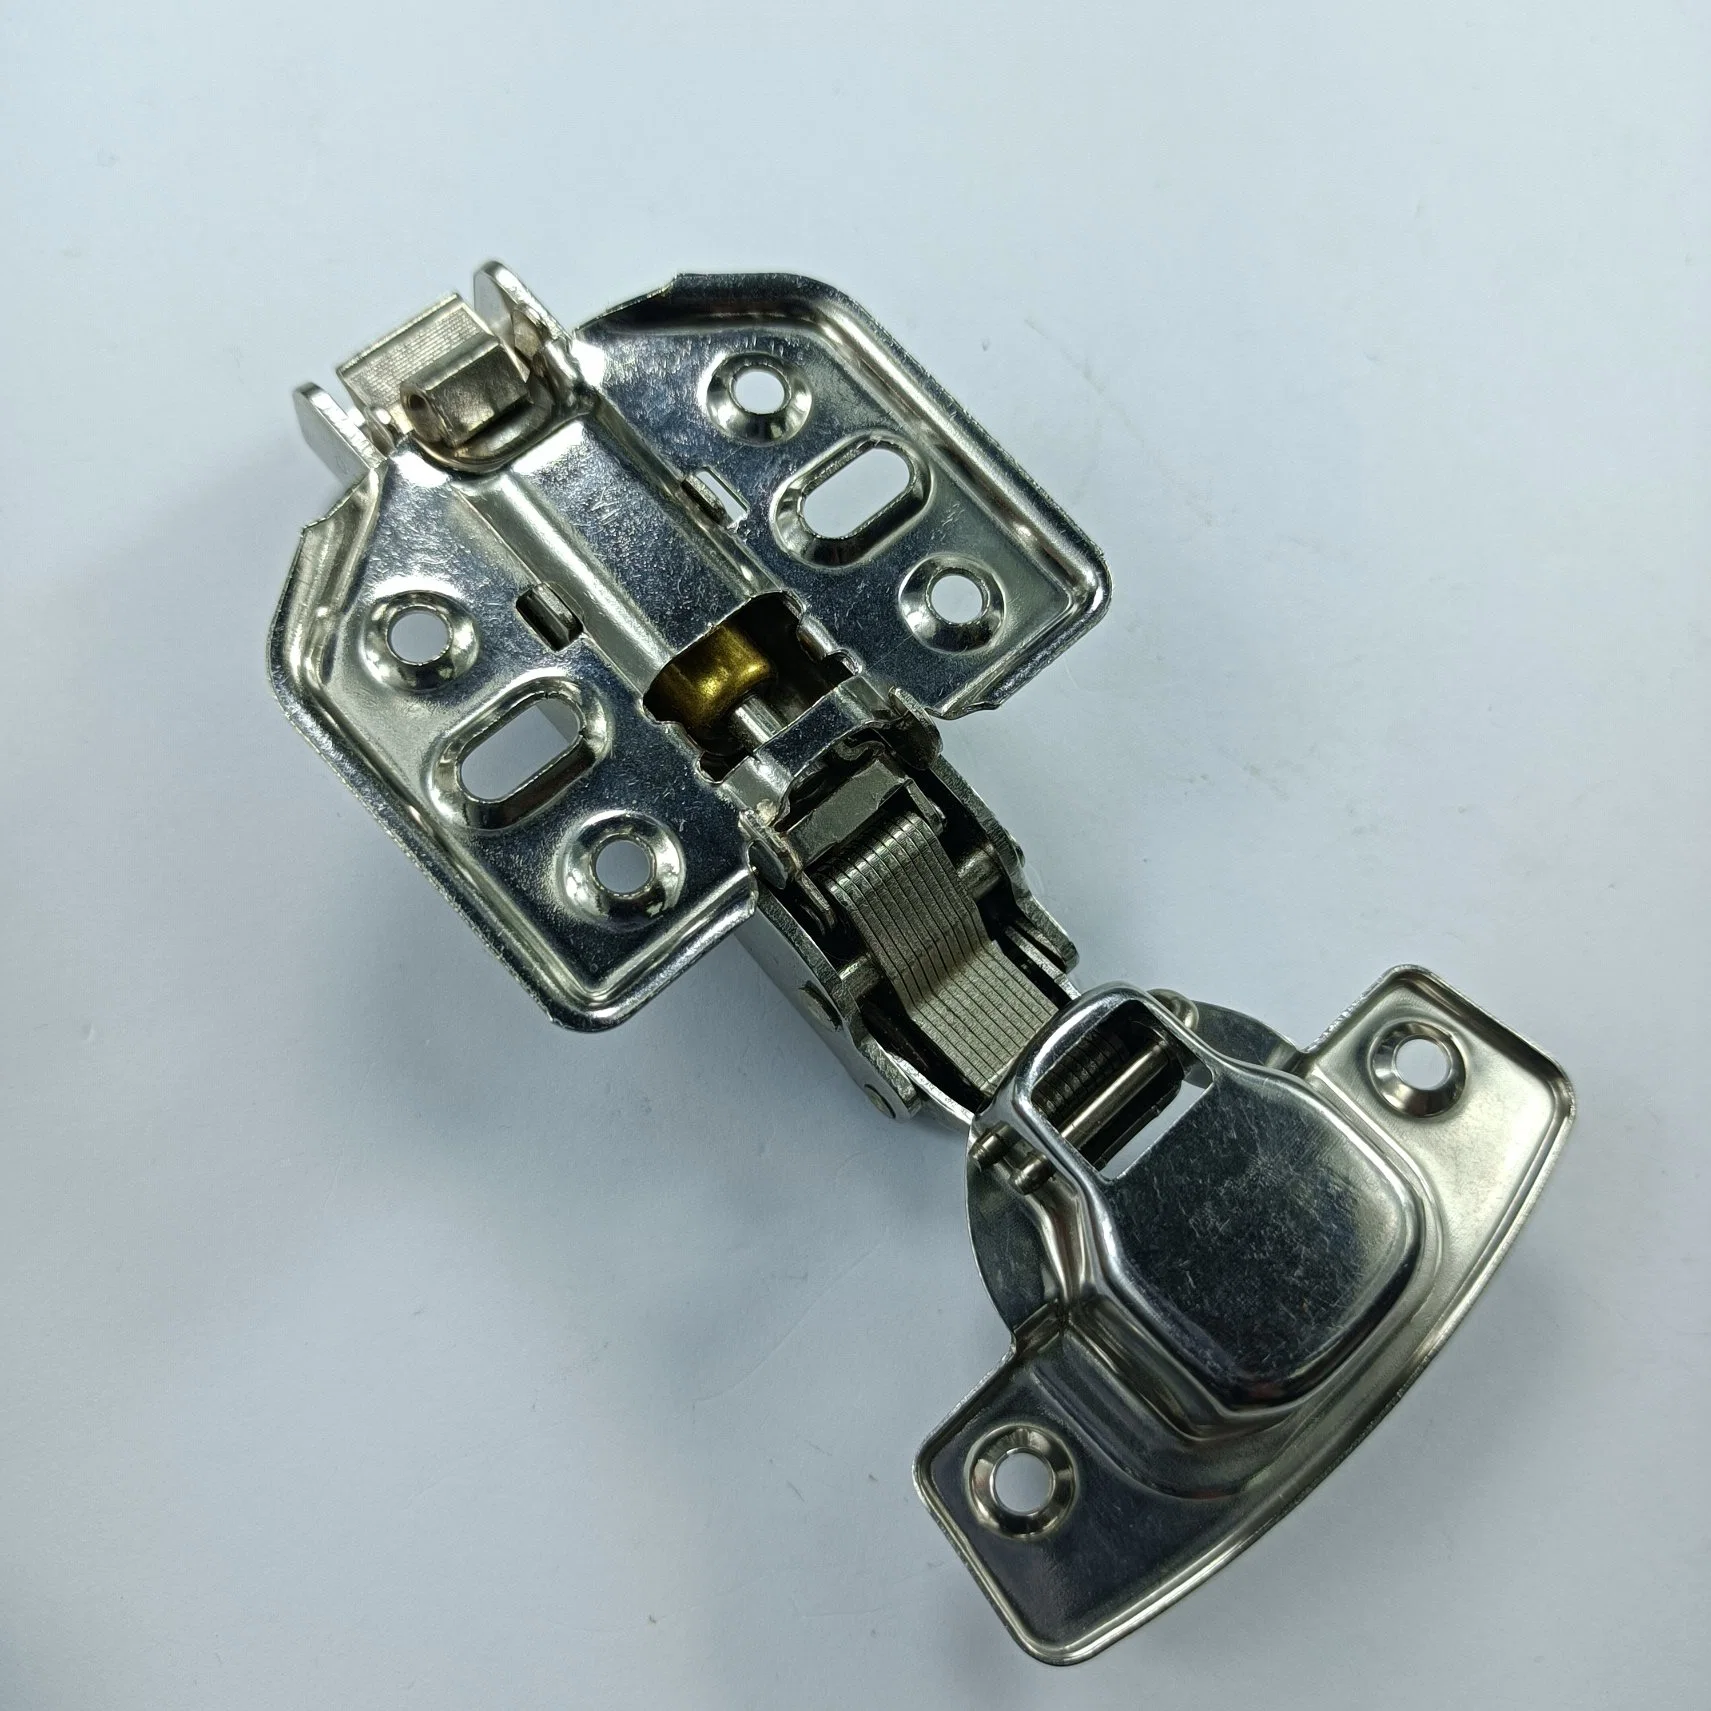 (Manufacturer) Cabinet Hydraulic Hinges / for Wooden Cabinet Doors / Glass Doors / TV Cabinets and Other Furniture